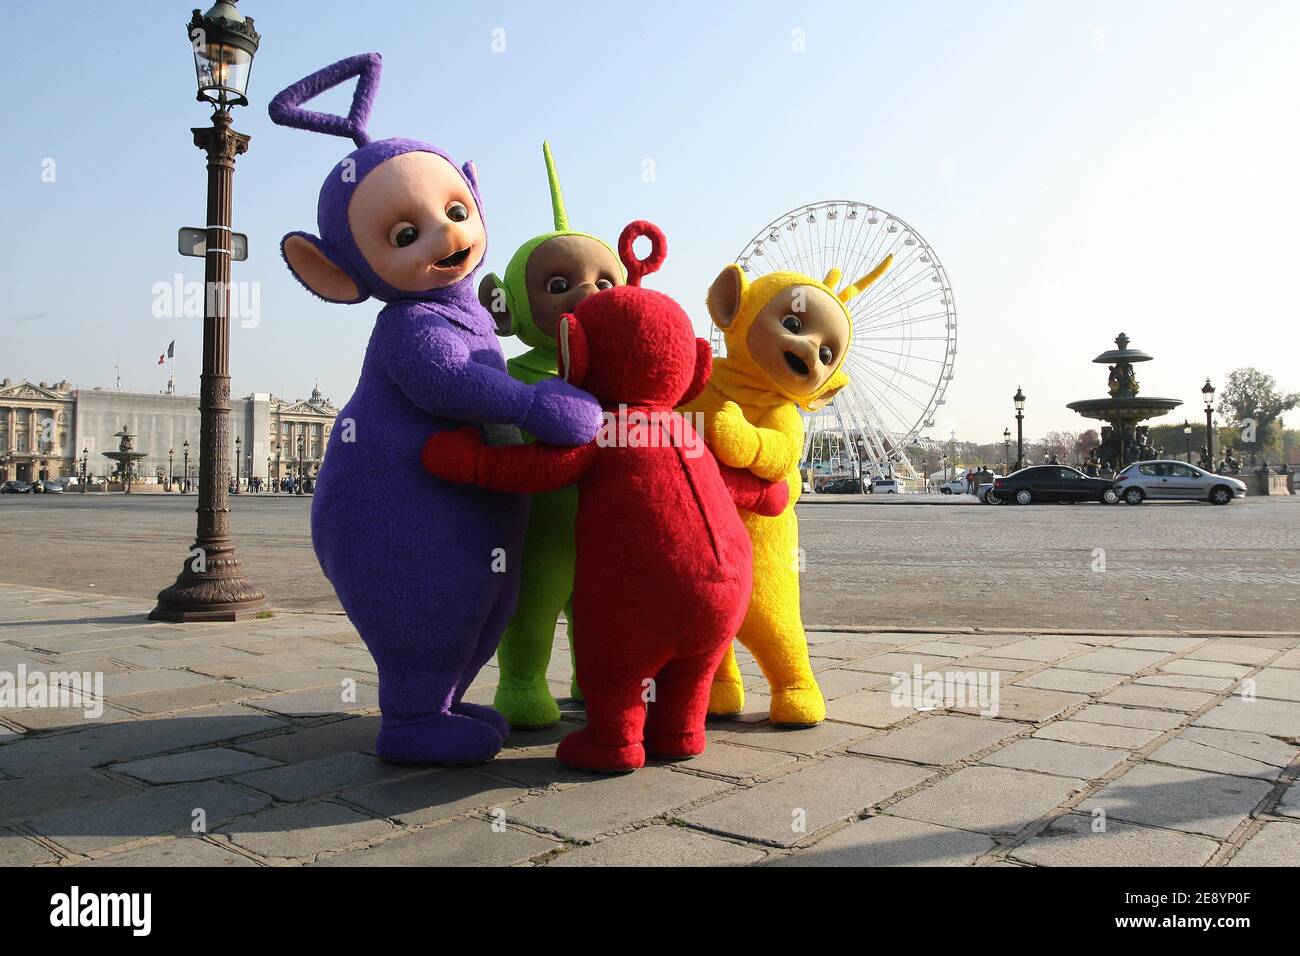 The Teletubbies, Tinky Winky, Dipsy, Laa-Laa and Po on the Place de la ...